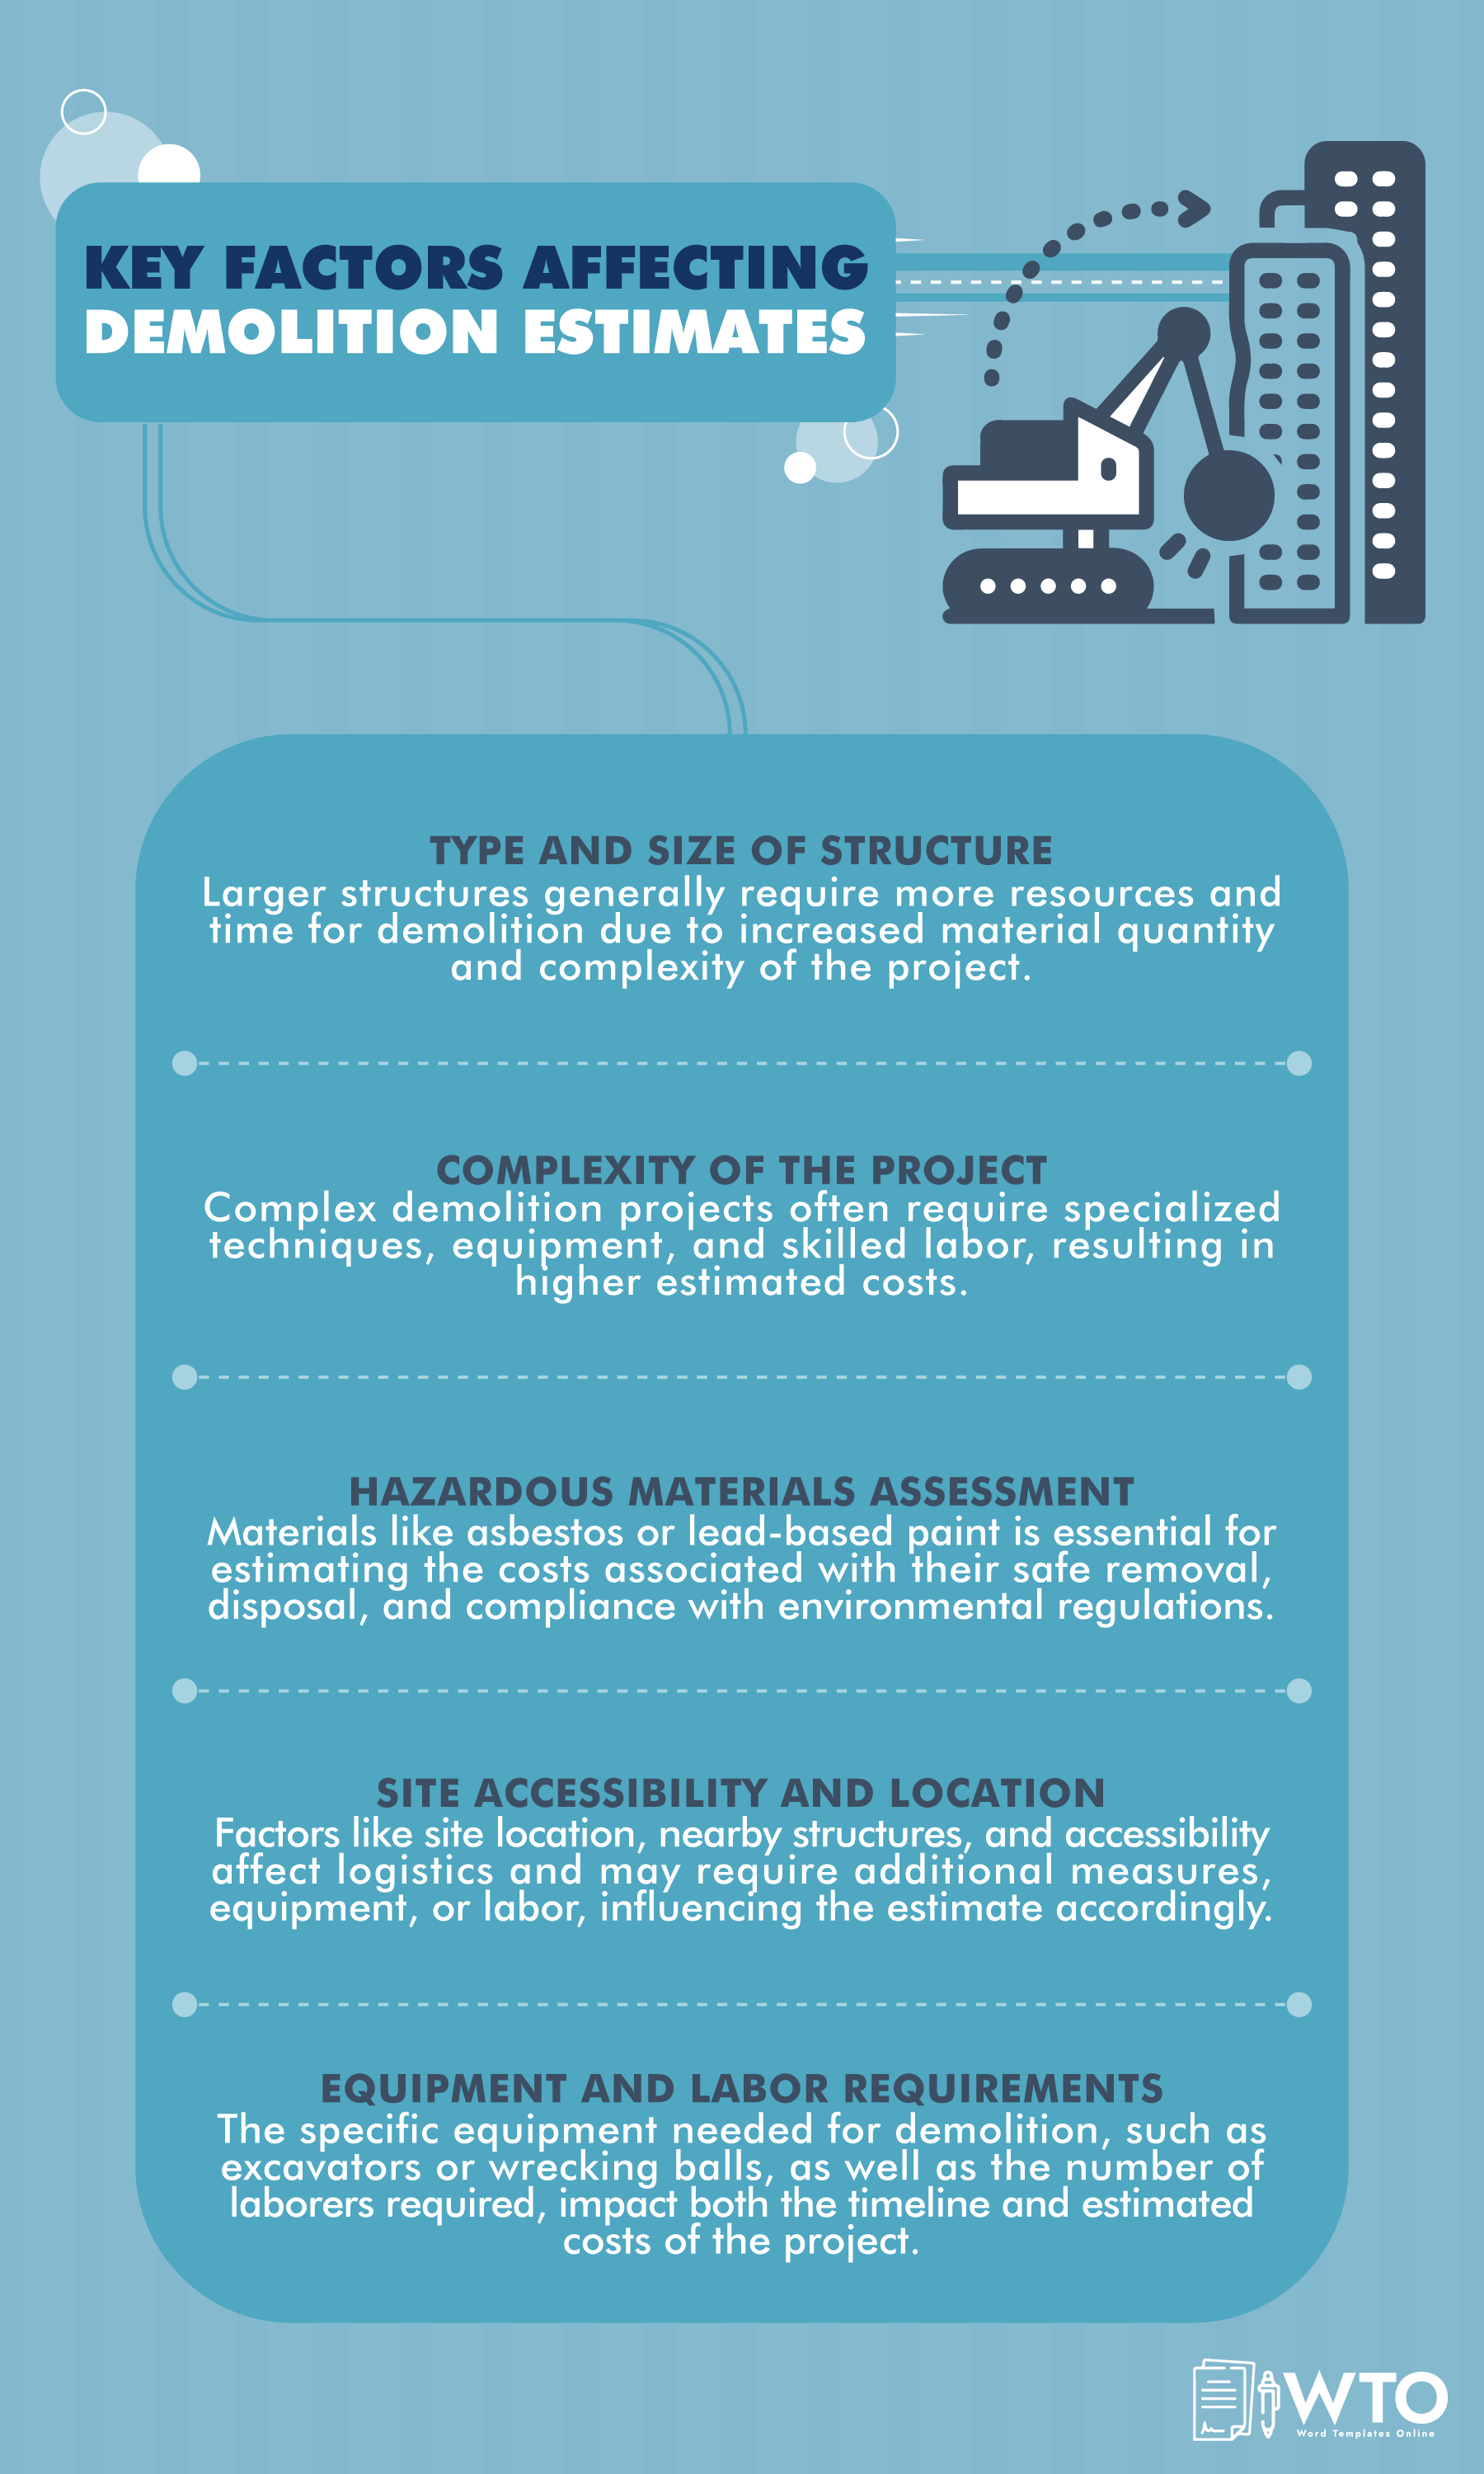 This infographic is about the key factors affecting Demolition estimate.